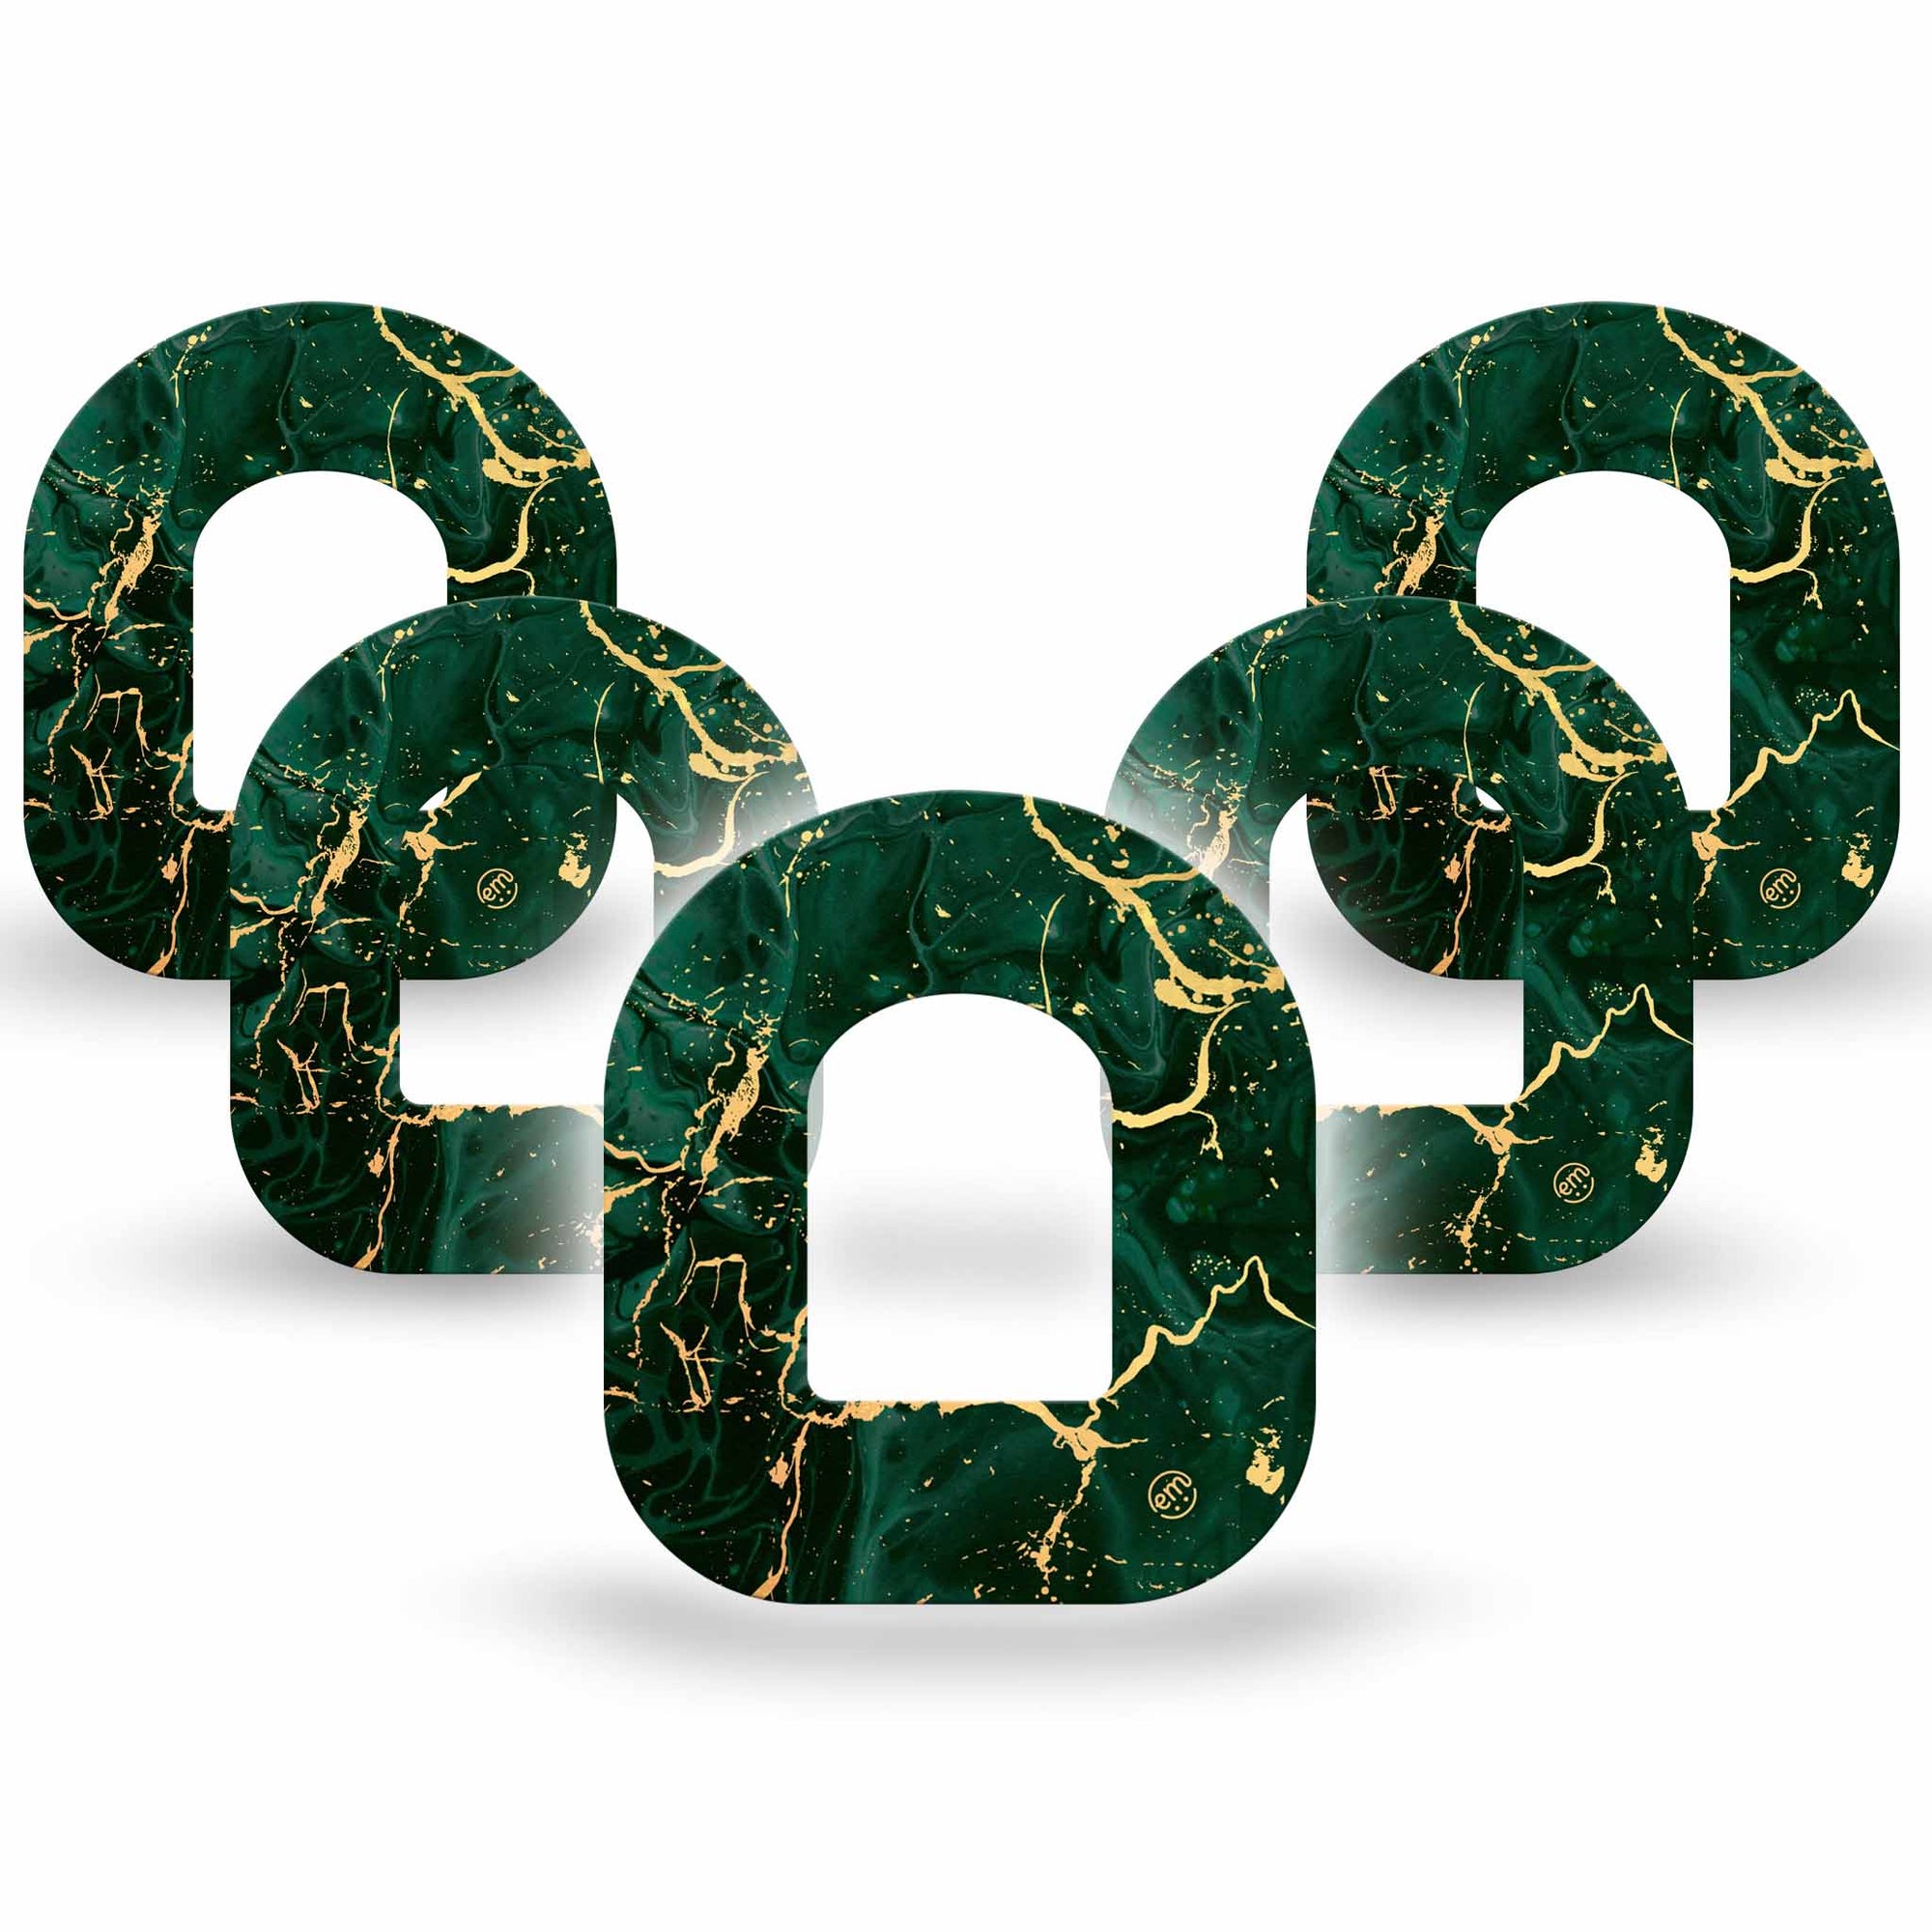 ExpressionMed Green & Gold Marble Pod Tape 5-Pack Green and Gold Stone, Omnipod, Overlay Patch Design